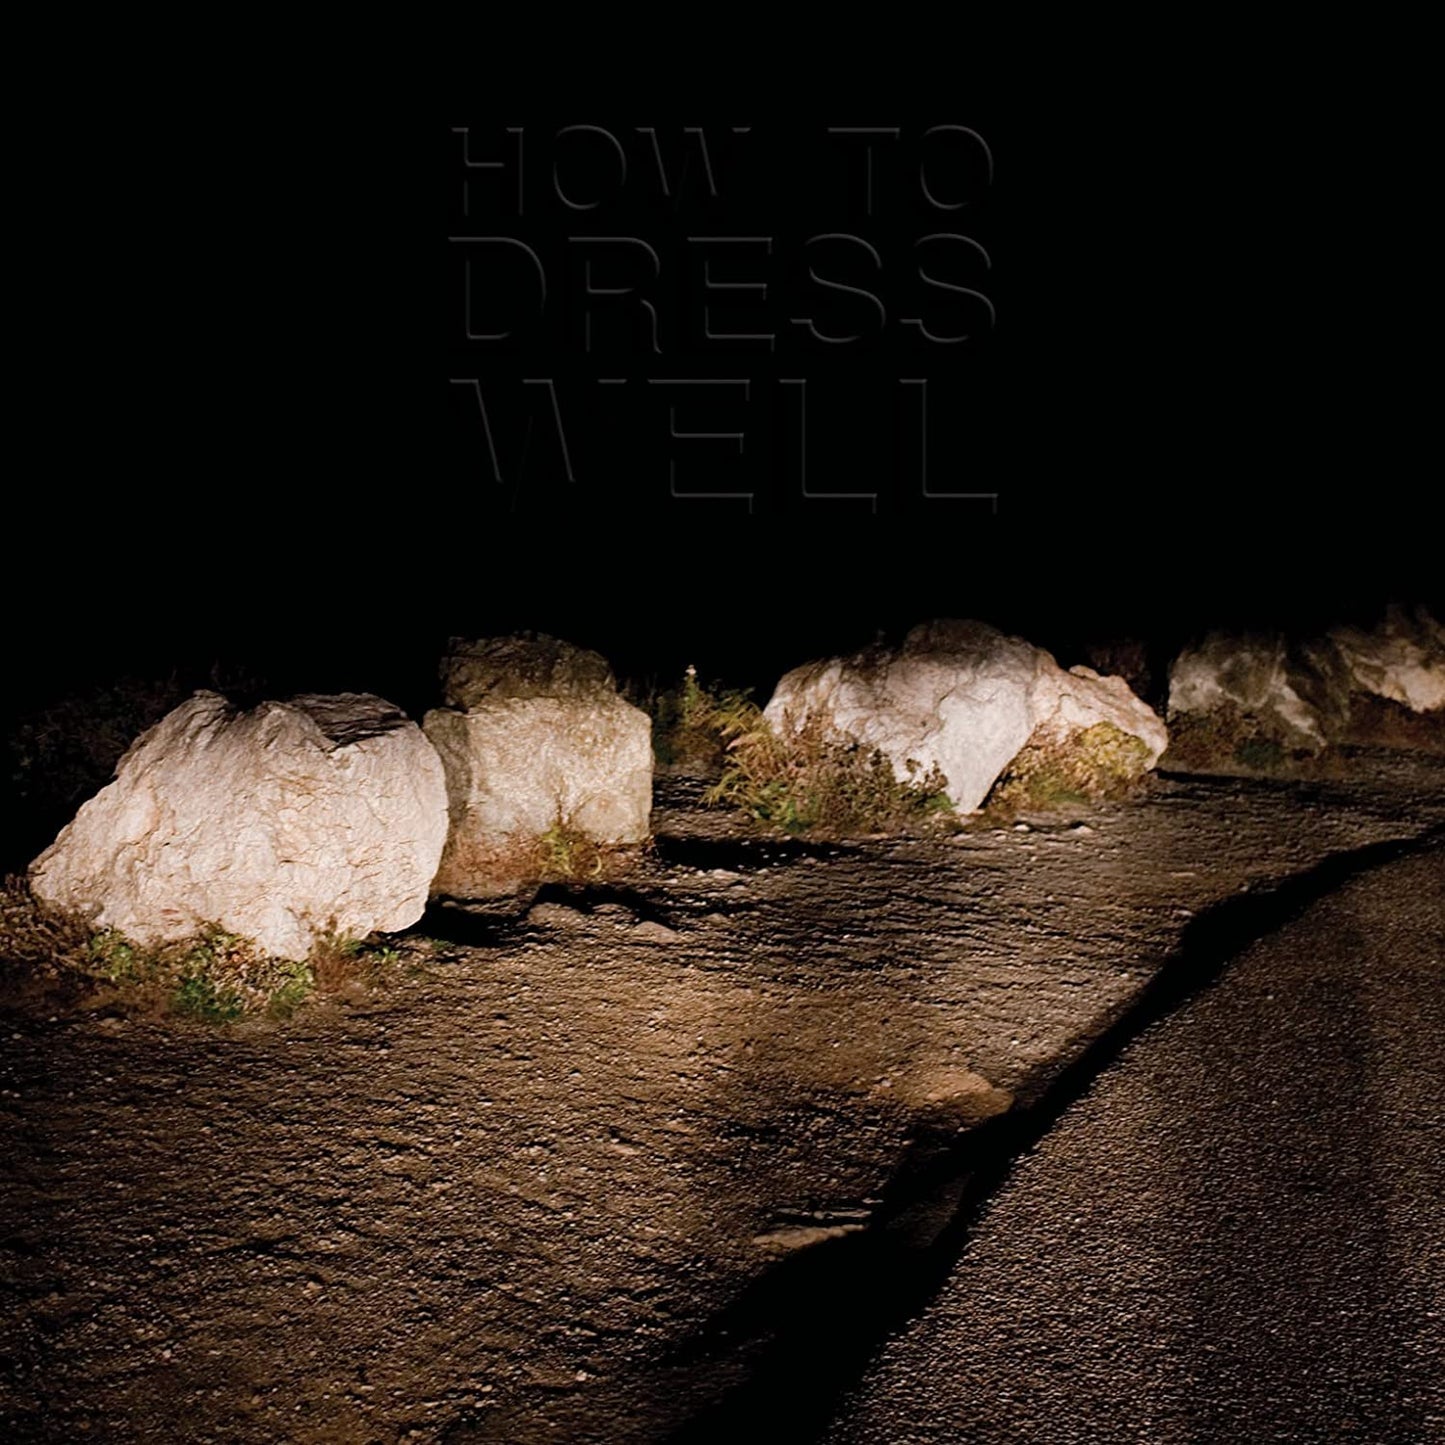 How To Dress Well/Love Remains [LP]